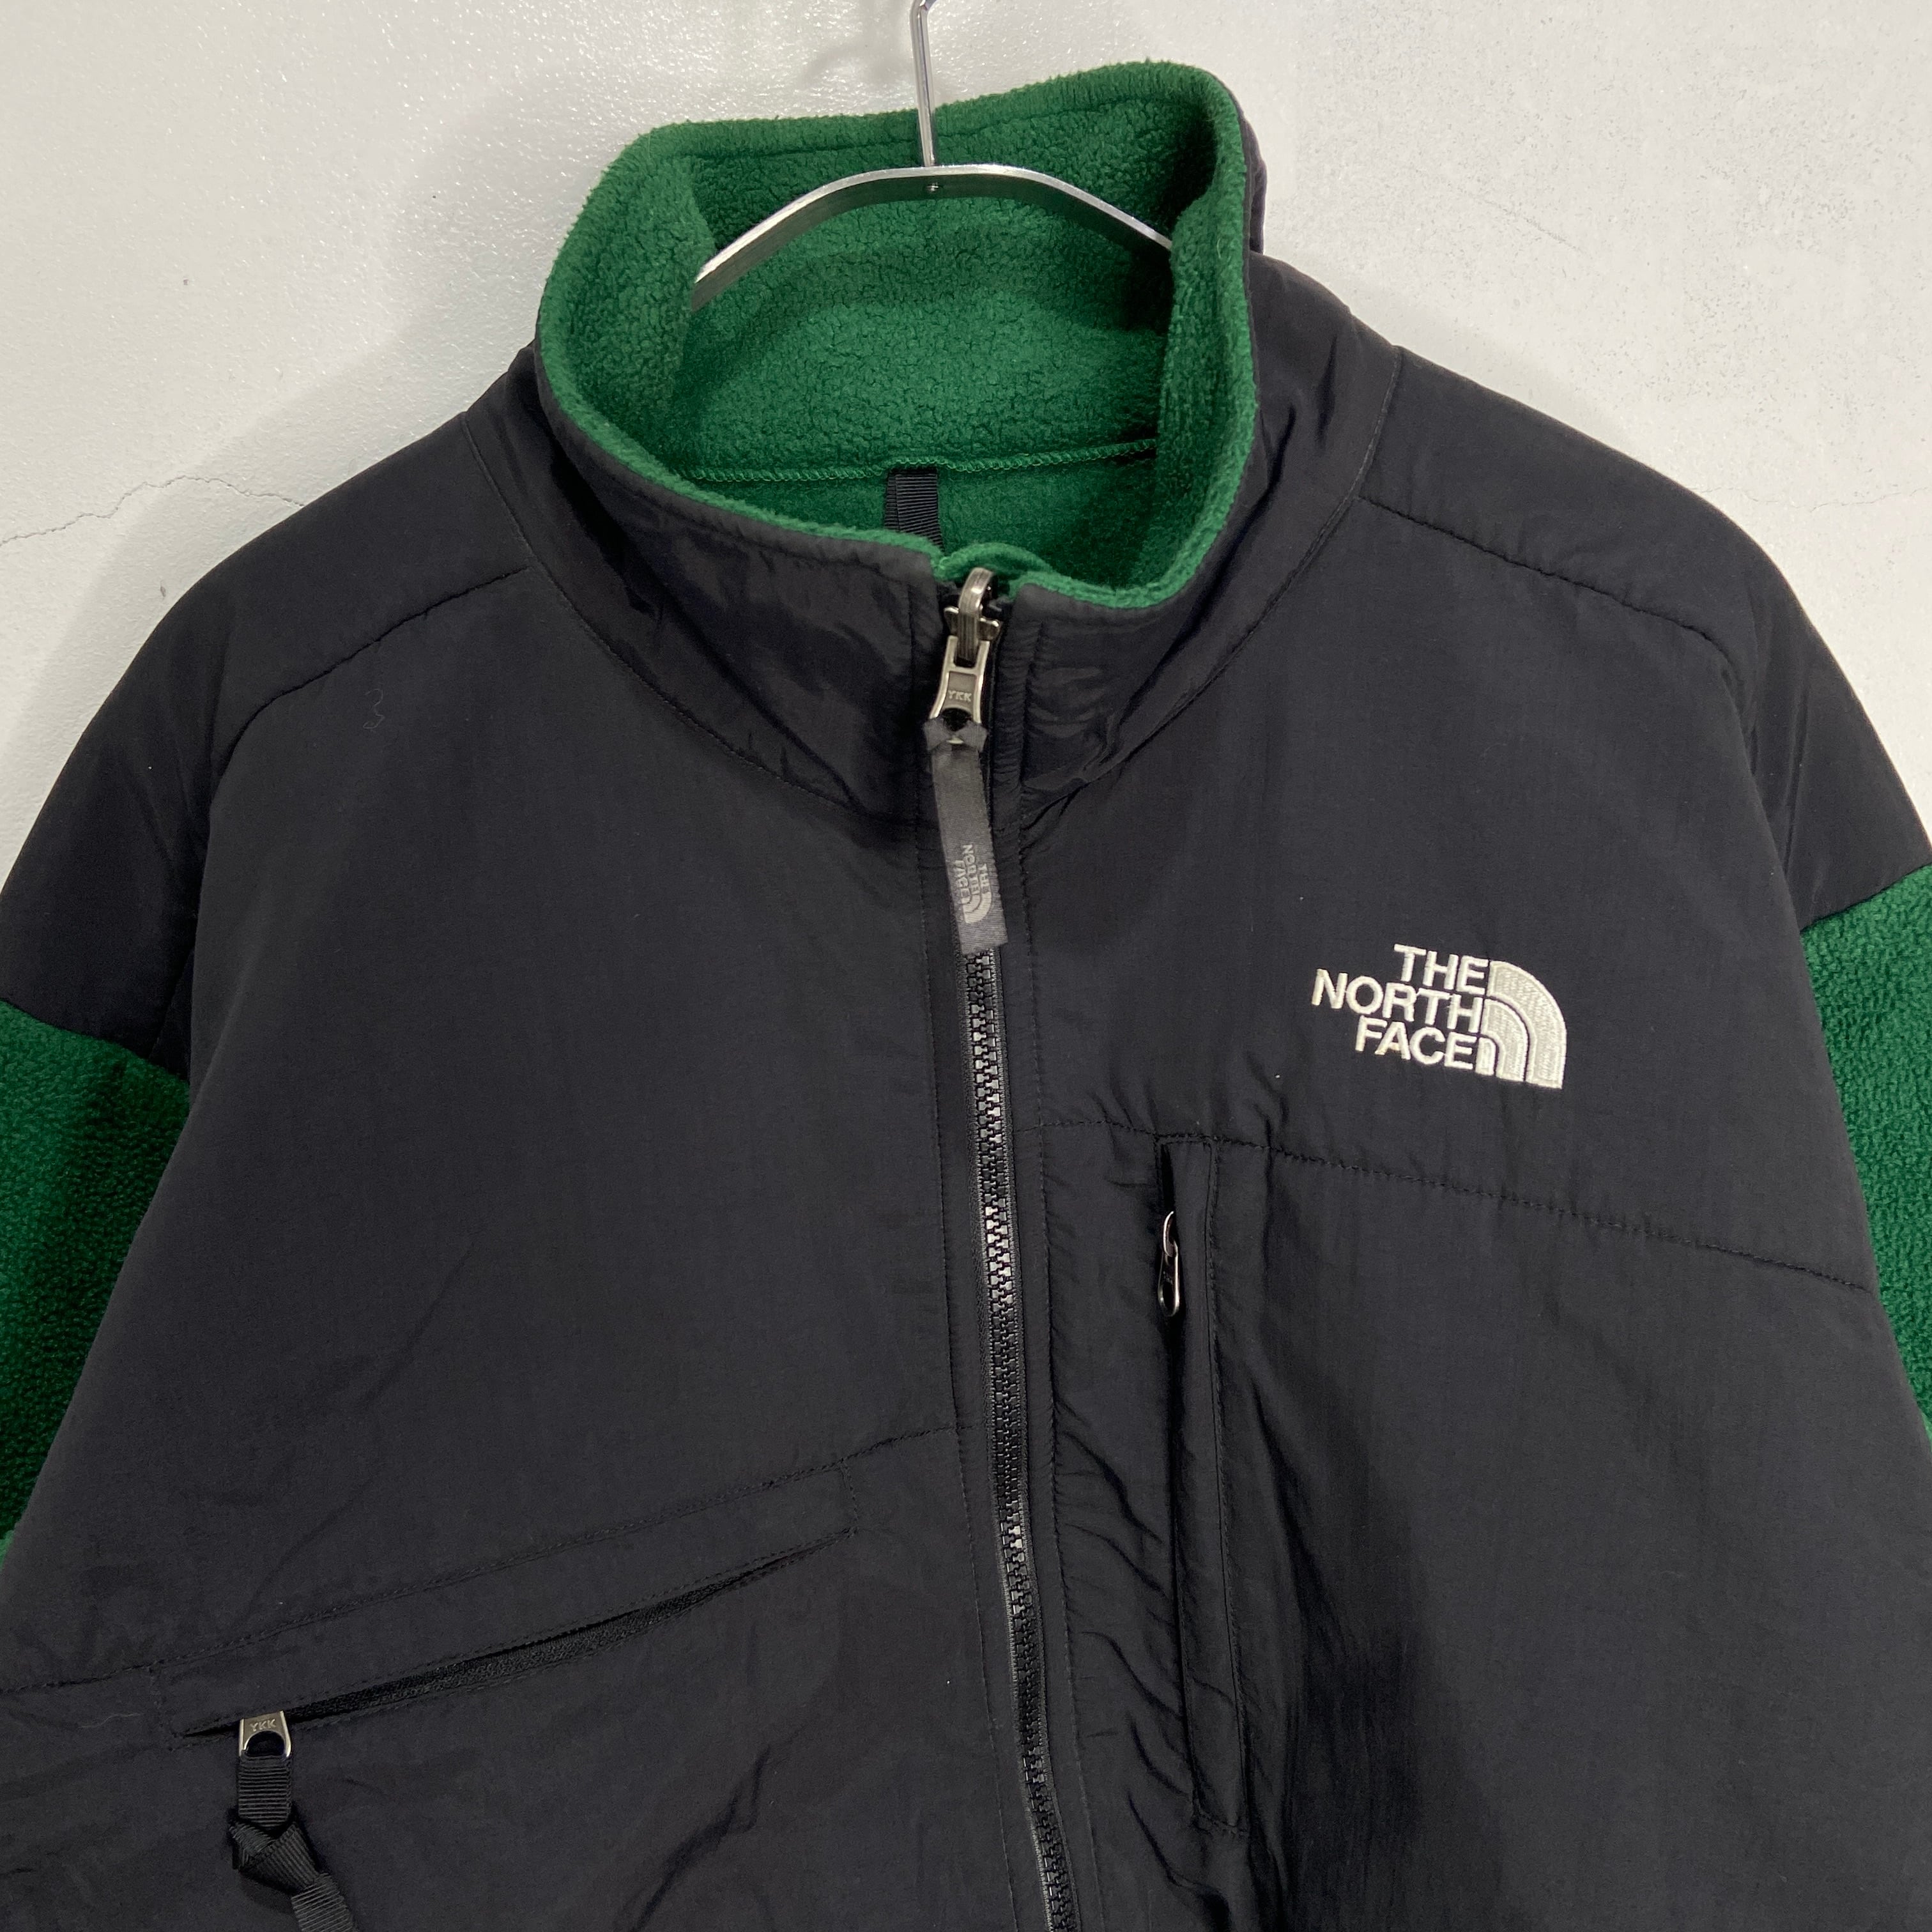 THE NORTH FACE デナリジャケット フリース 緑 ポーラテック L | 古着 